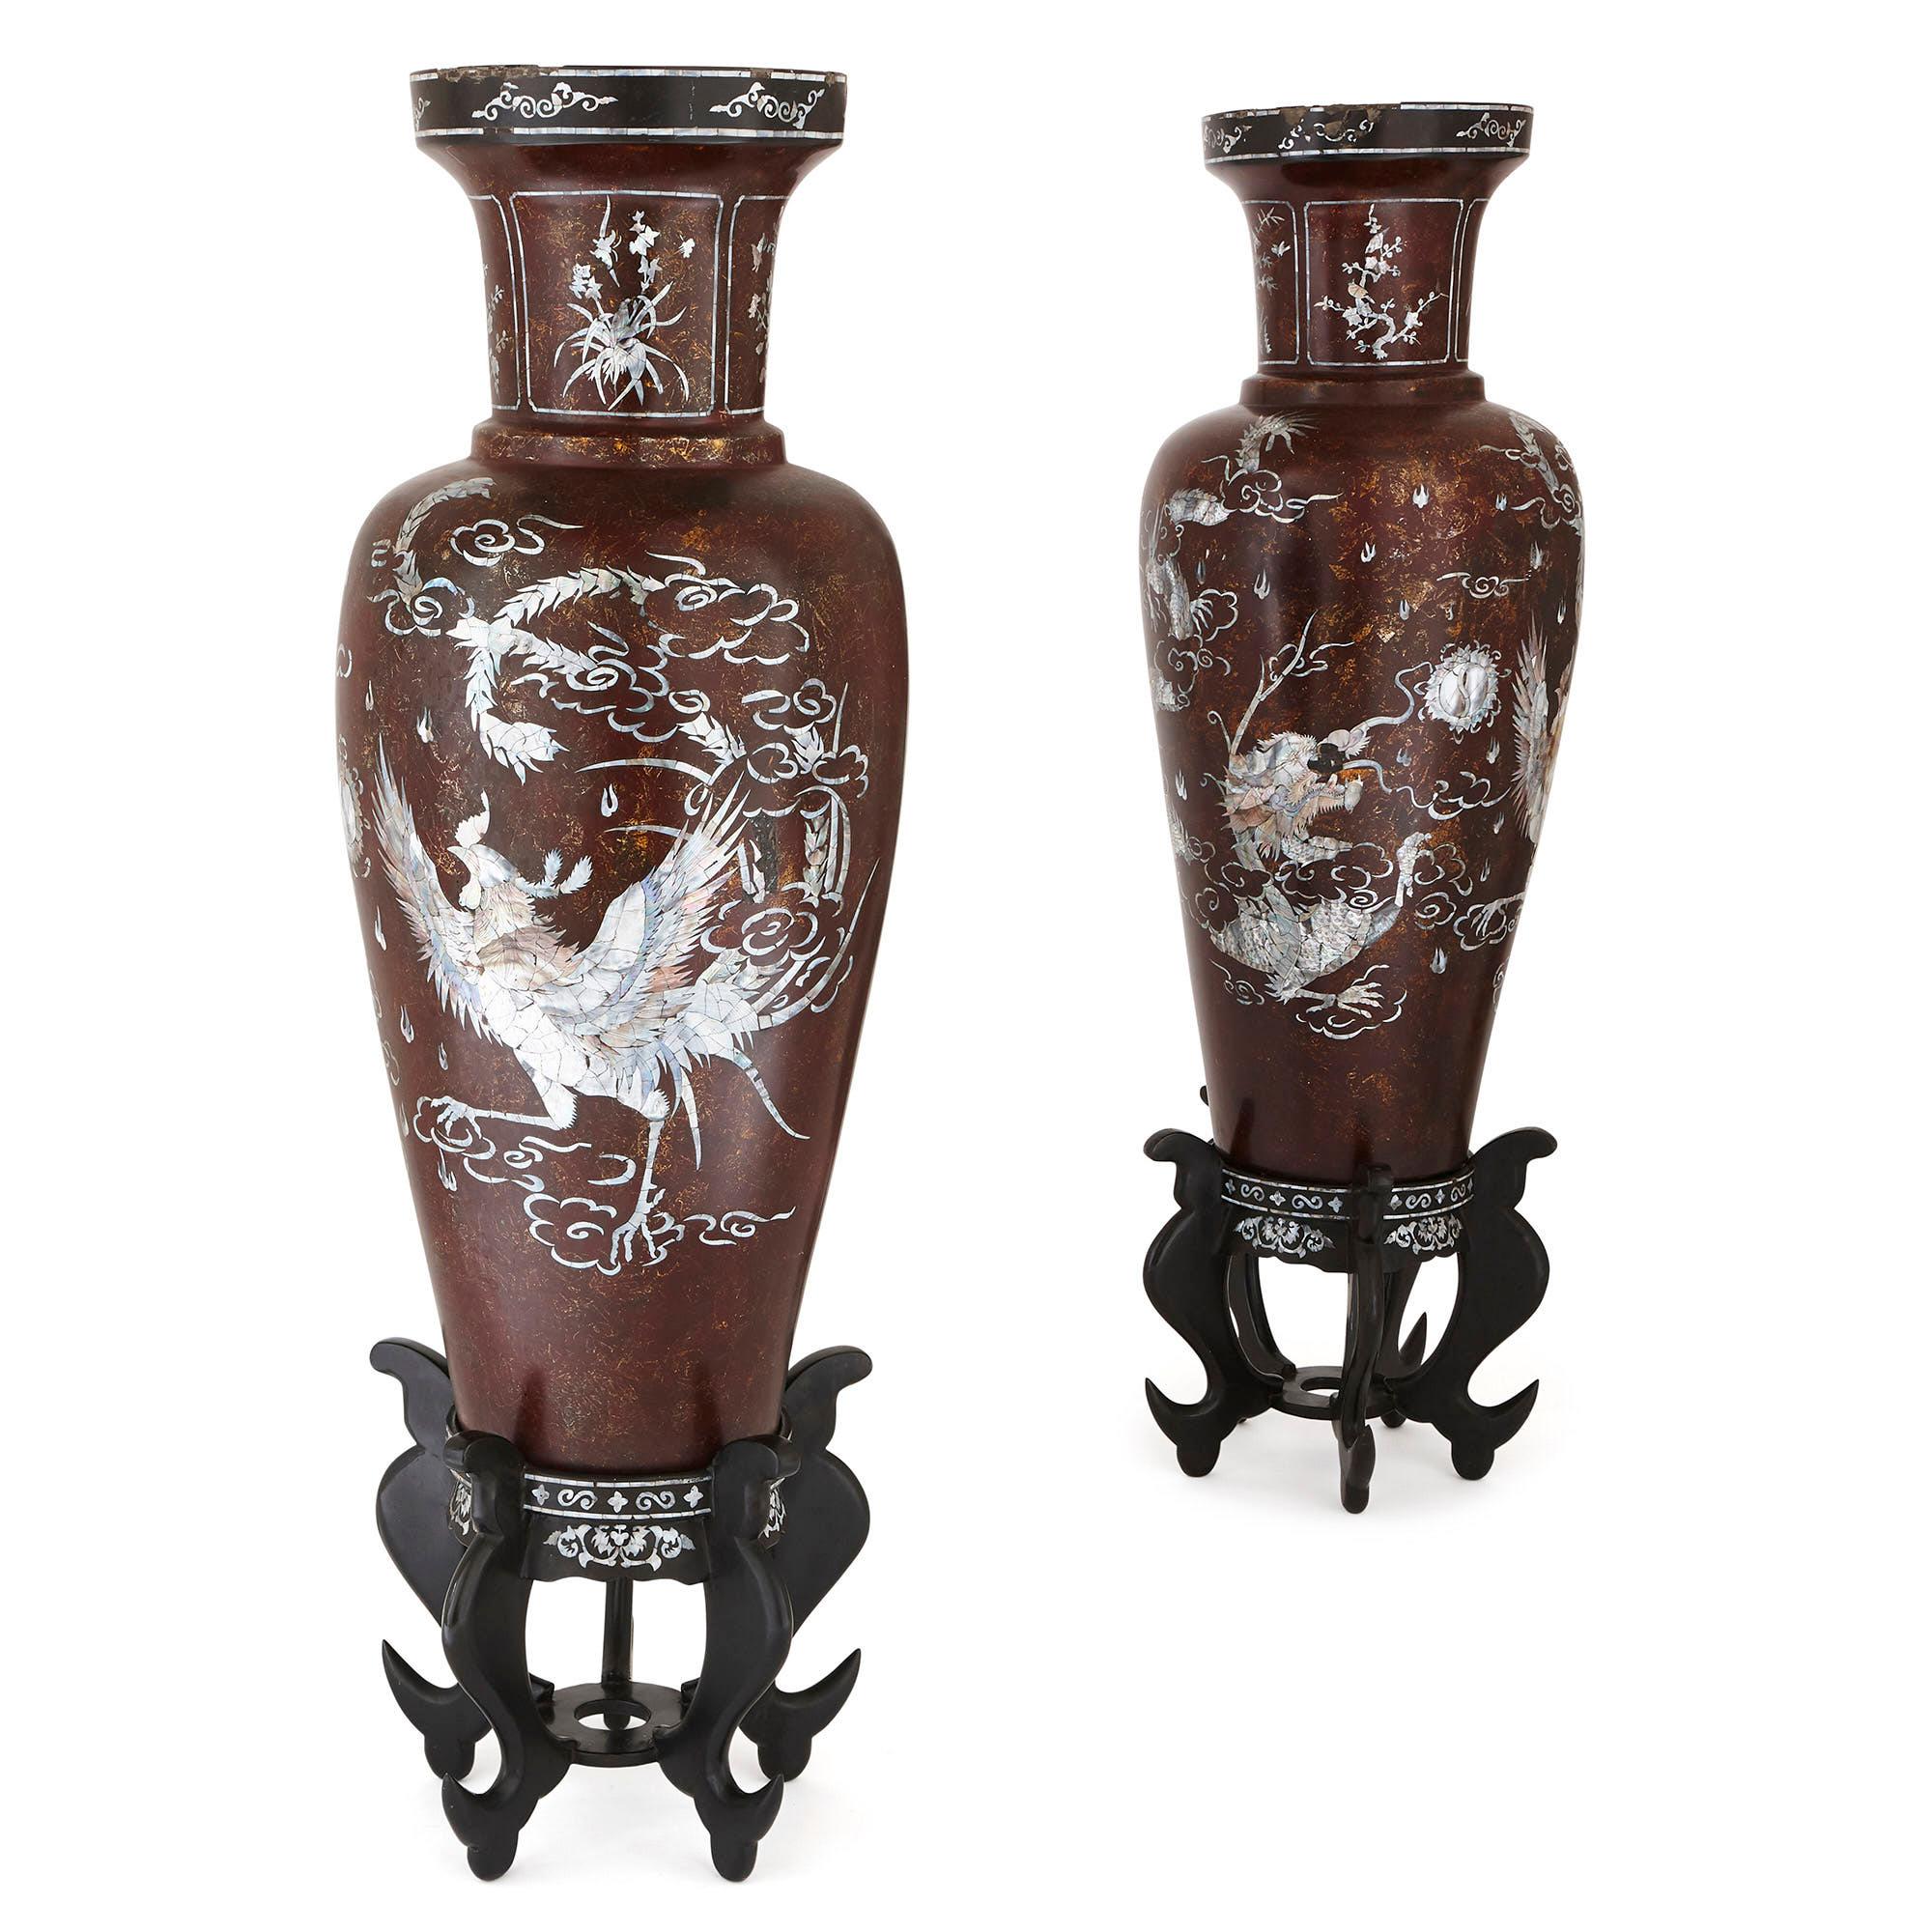 This pair of large Chinese papier mâché vases feature a brown ground and extensive mother of pearl inlays, the inlaid pieces arranged to create, on each vase, a depiction of a bird taking flight amid hints of wind and foliage. Each vase stands on